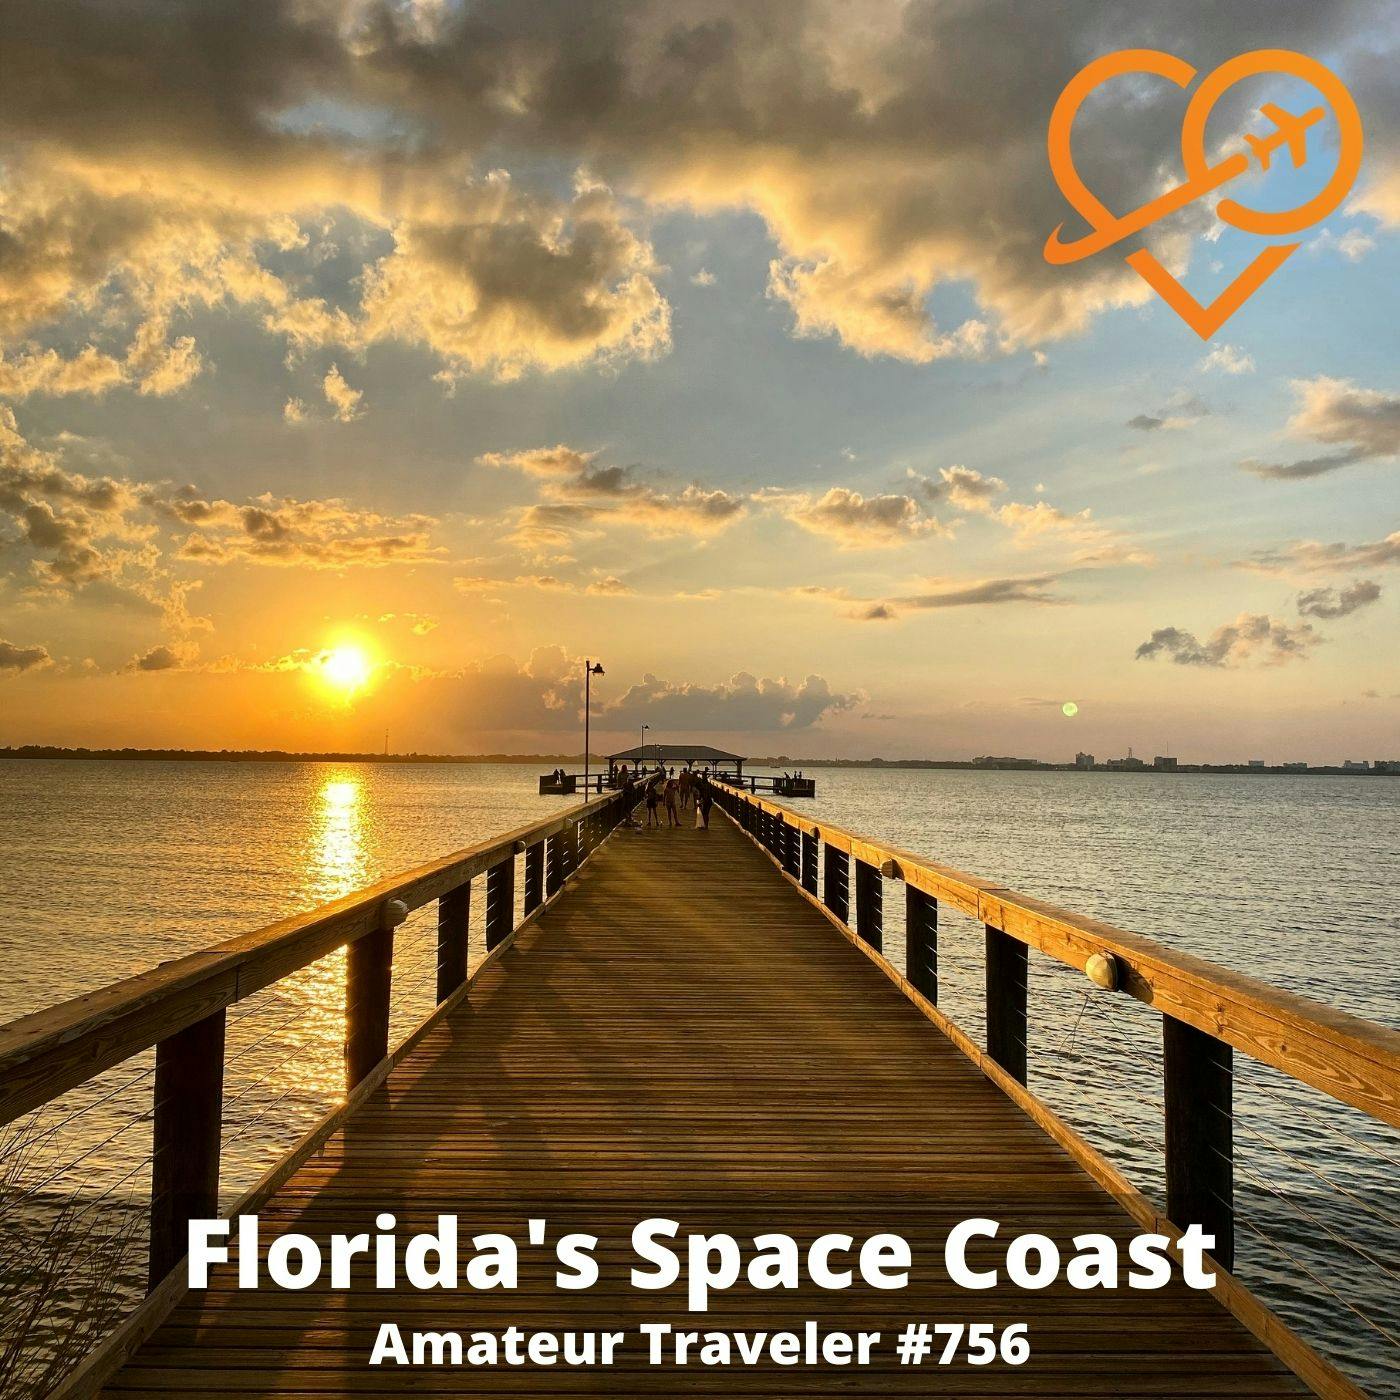 AT#756 - Travel to Florida’s Space Coast